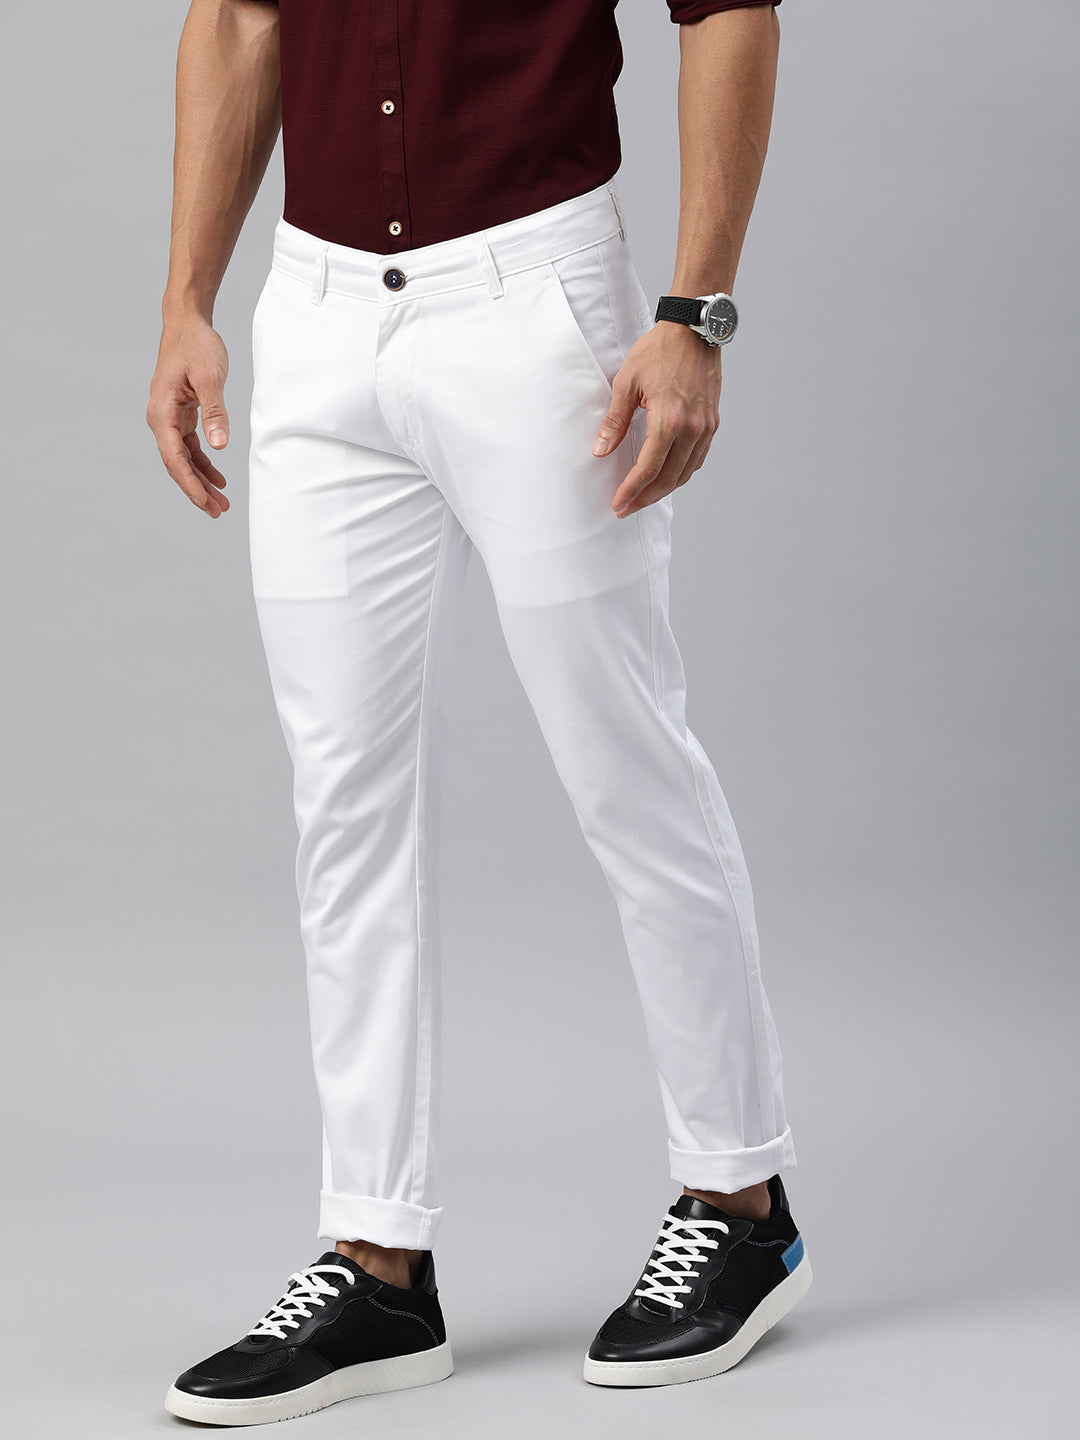 Majestic Man Regular Fit Satin Finish Cotton Casual Solid Chinos Trouser - White